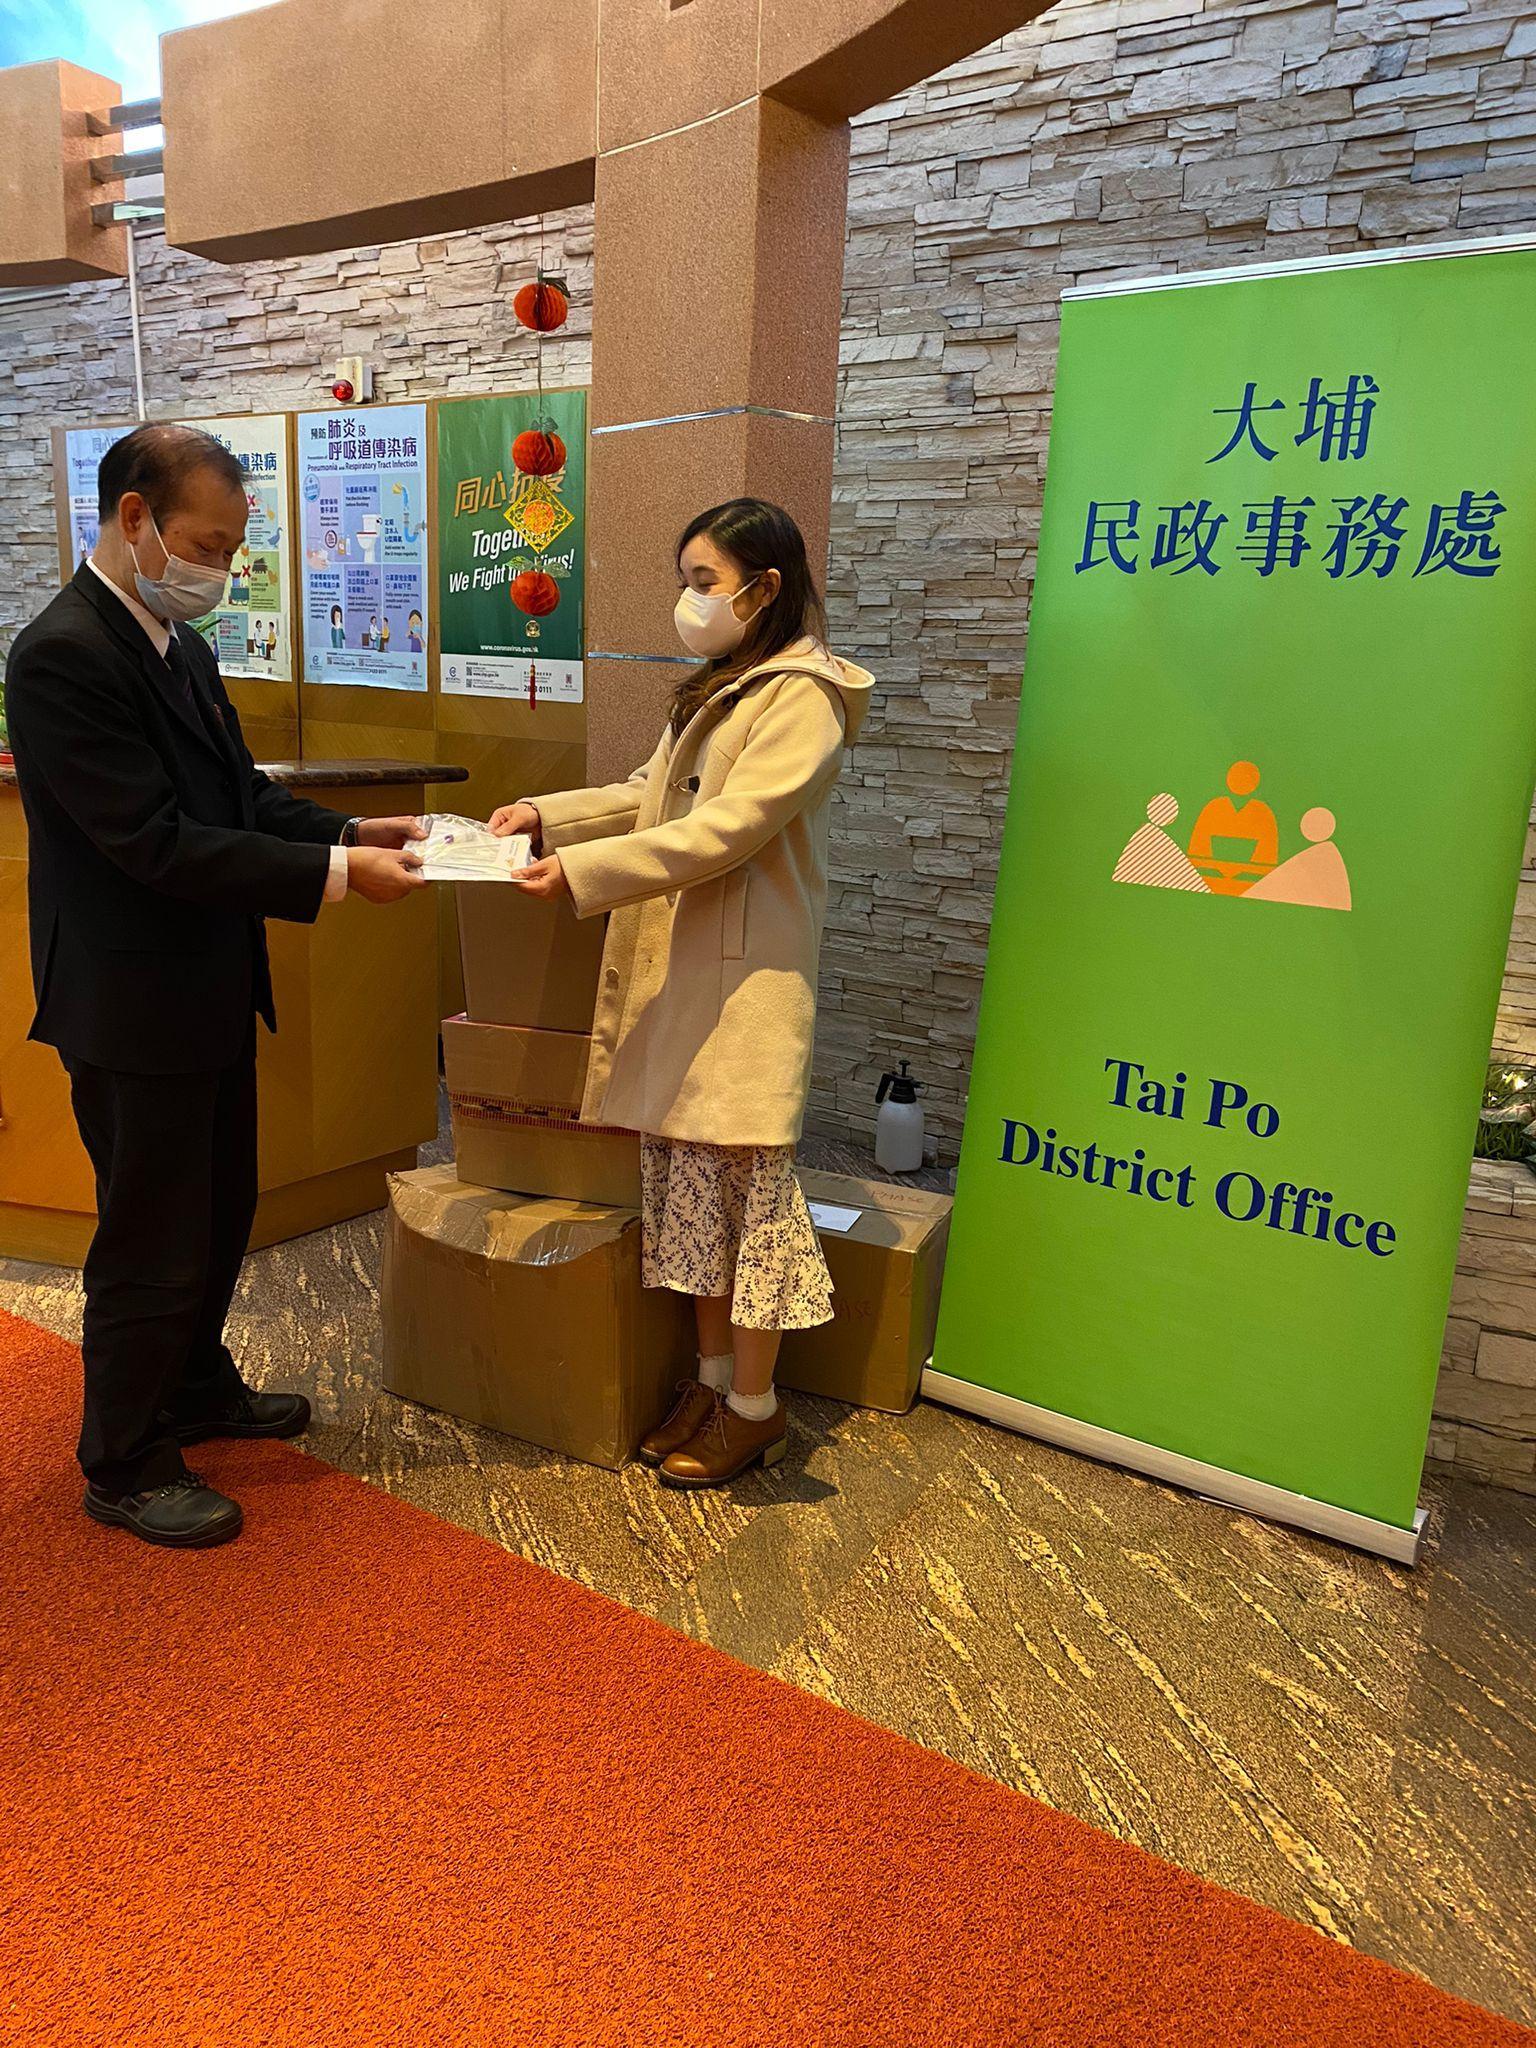 The Tai Po District Office today (January 31) distributed rapid test kits to property management companies in Tai Po District for testing by residents.